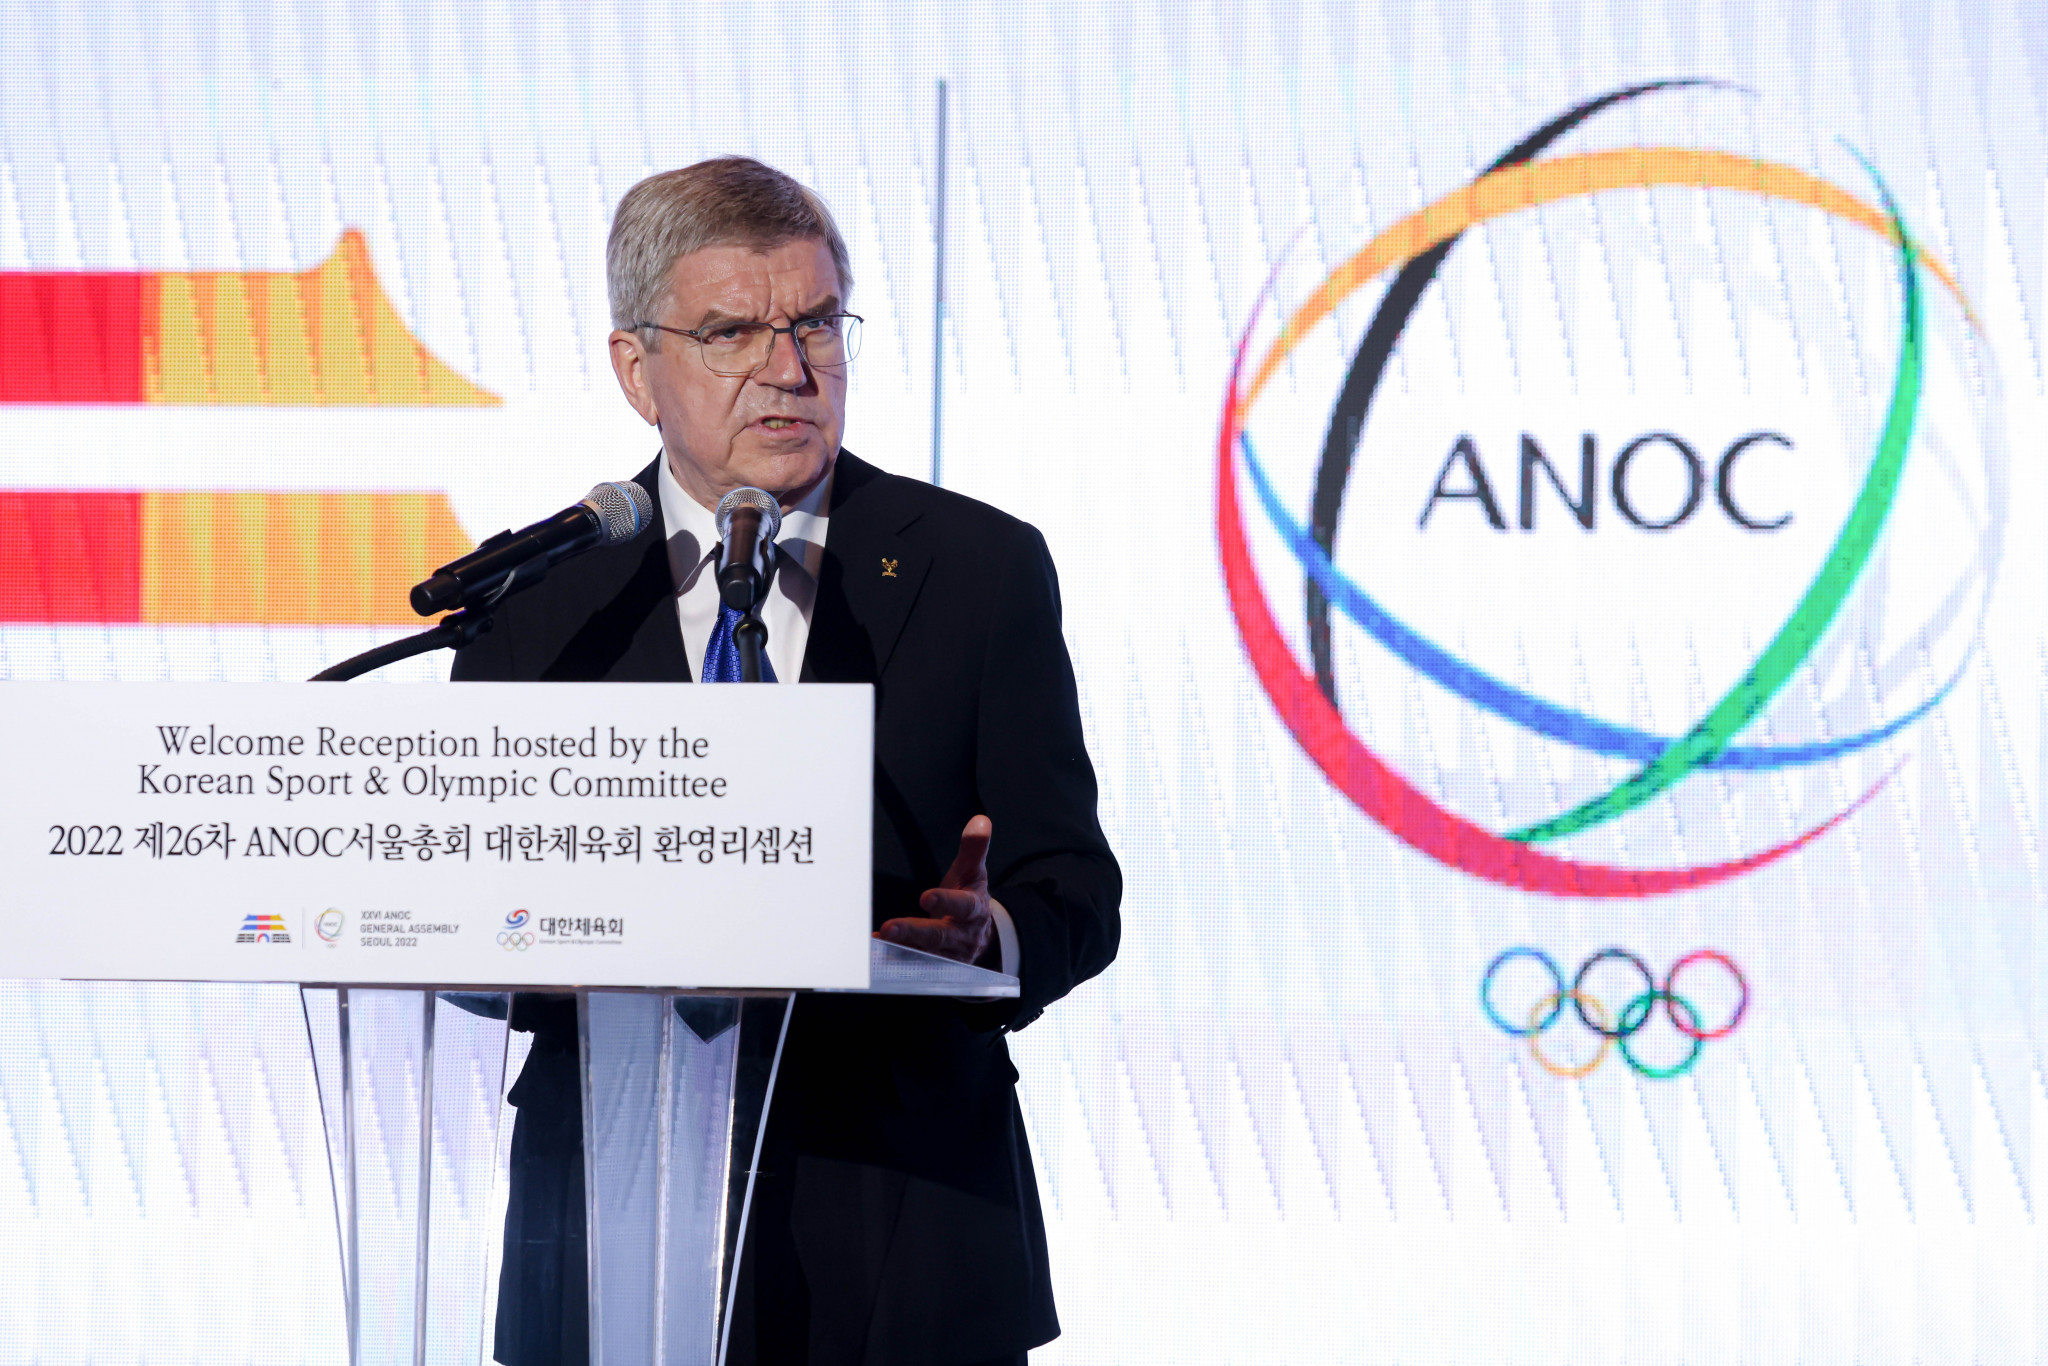 Bach gave a short speech as anticipation built prior to the ANOC General Assembly ©ANOC